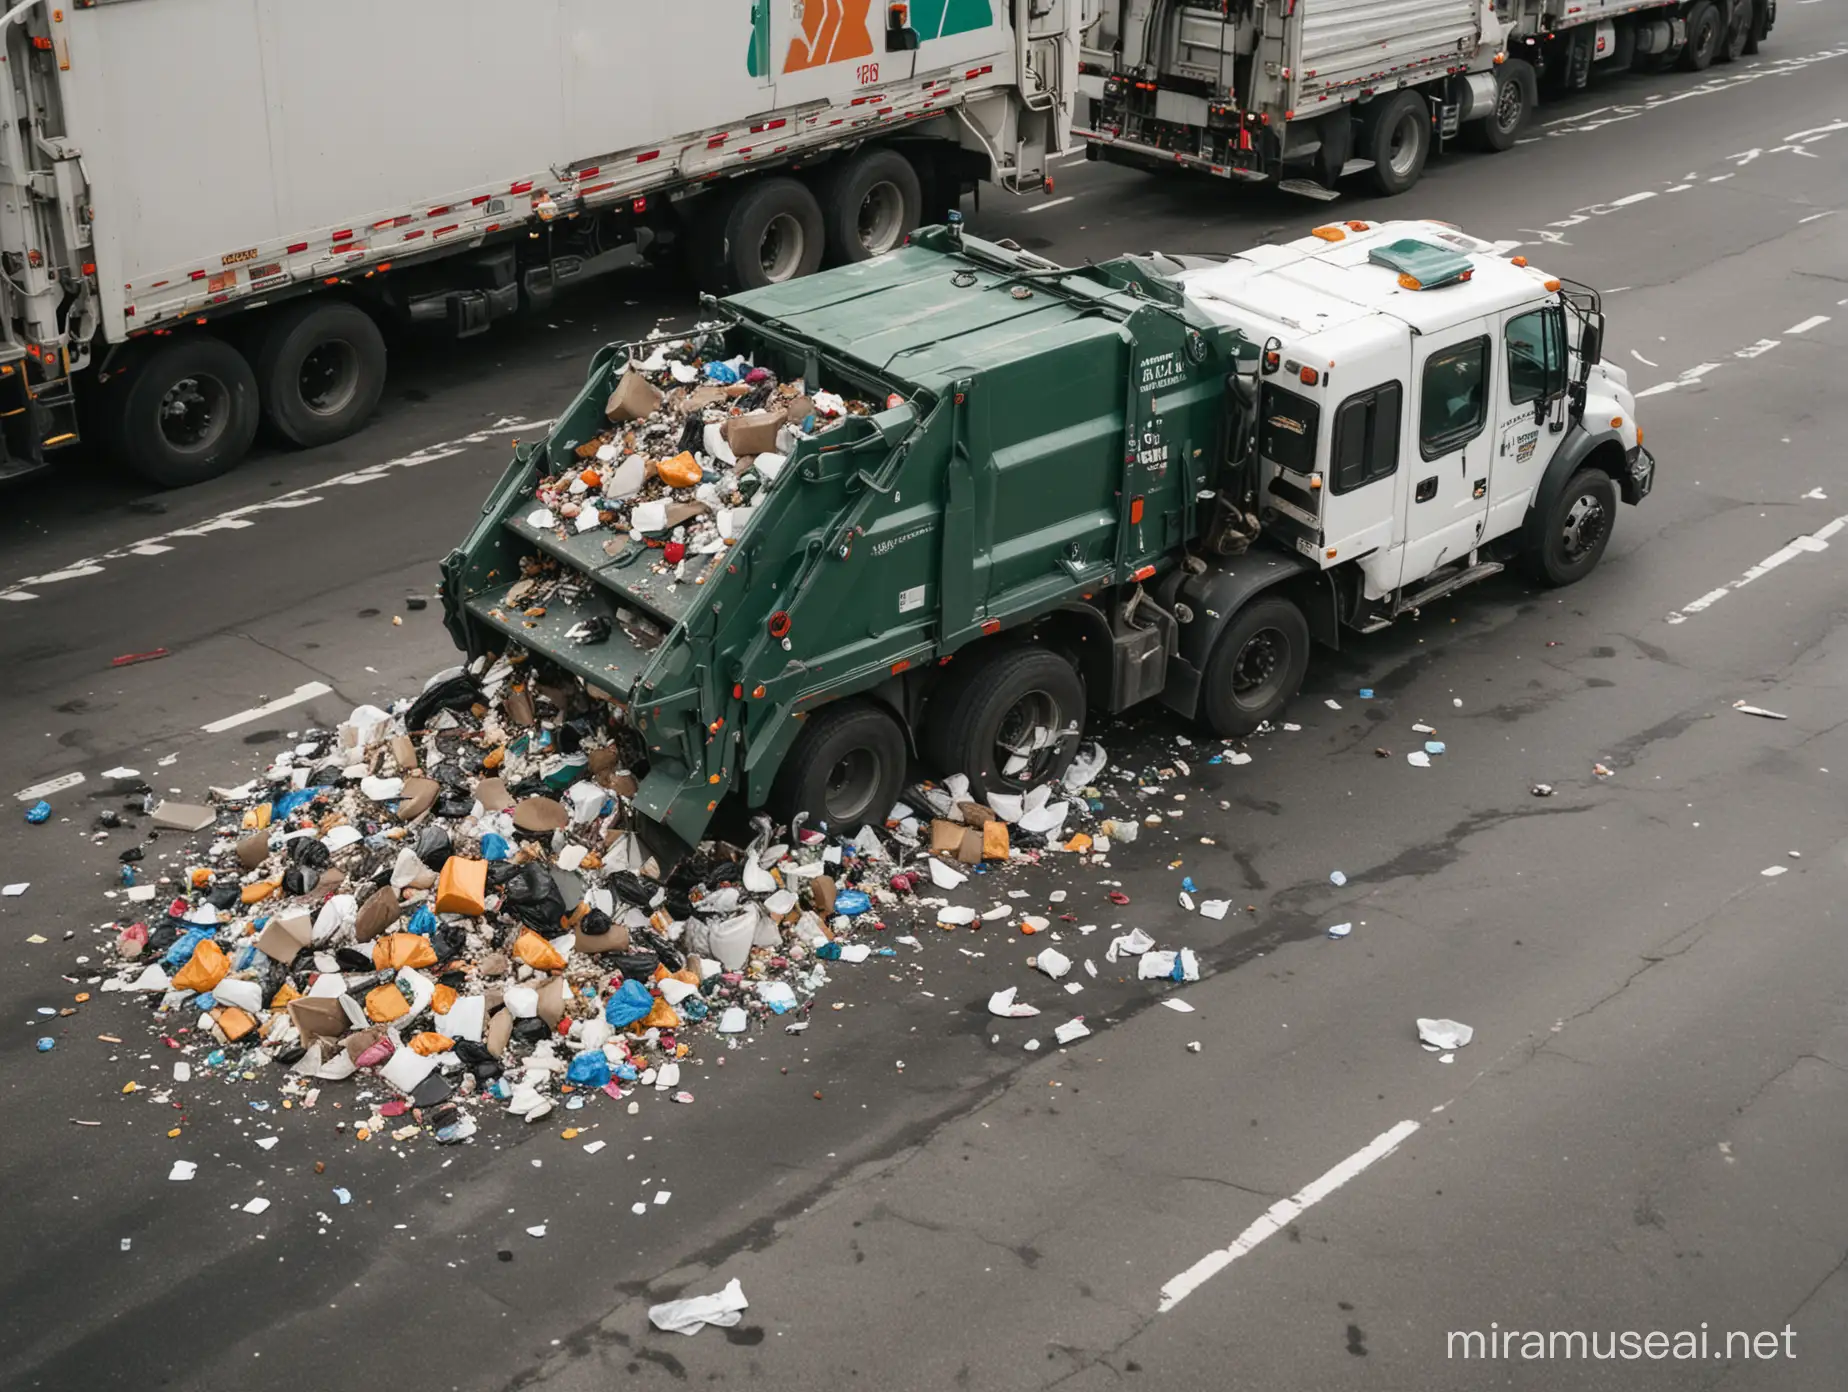 Garbage Truck Collecting Waste in Urban Environment